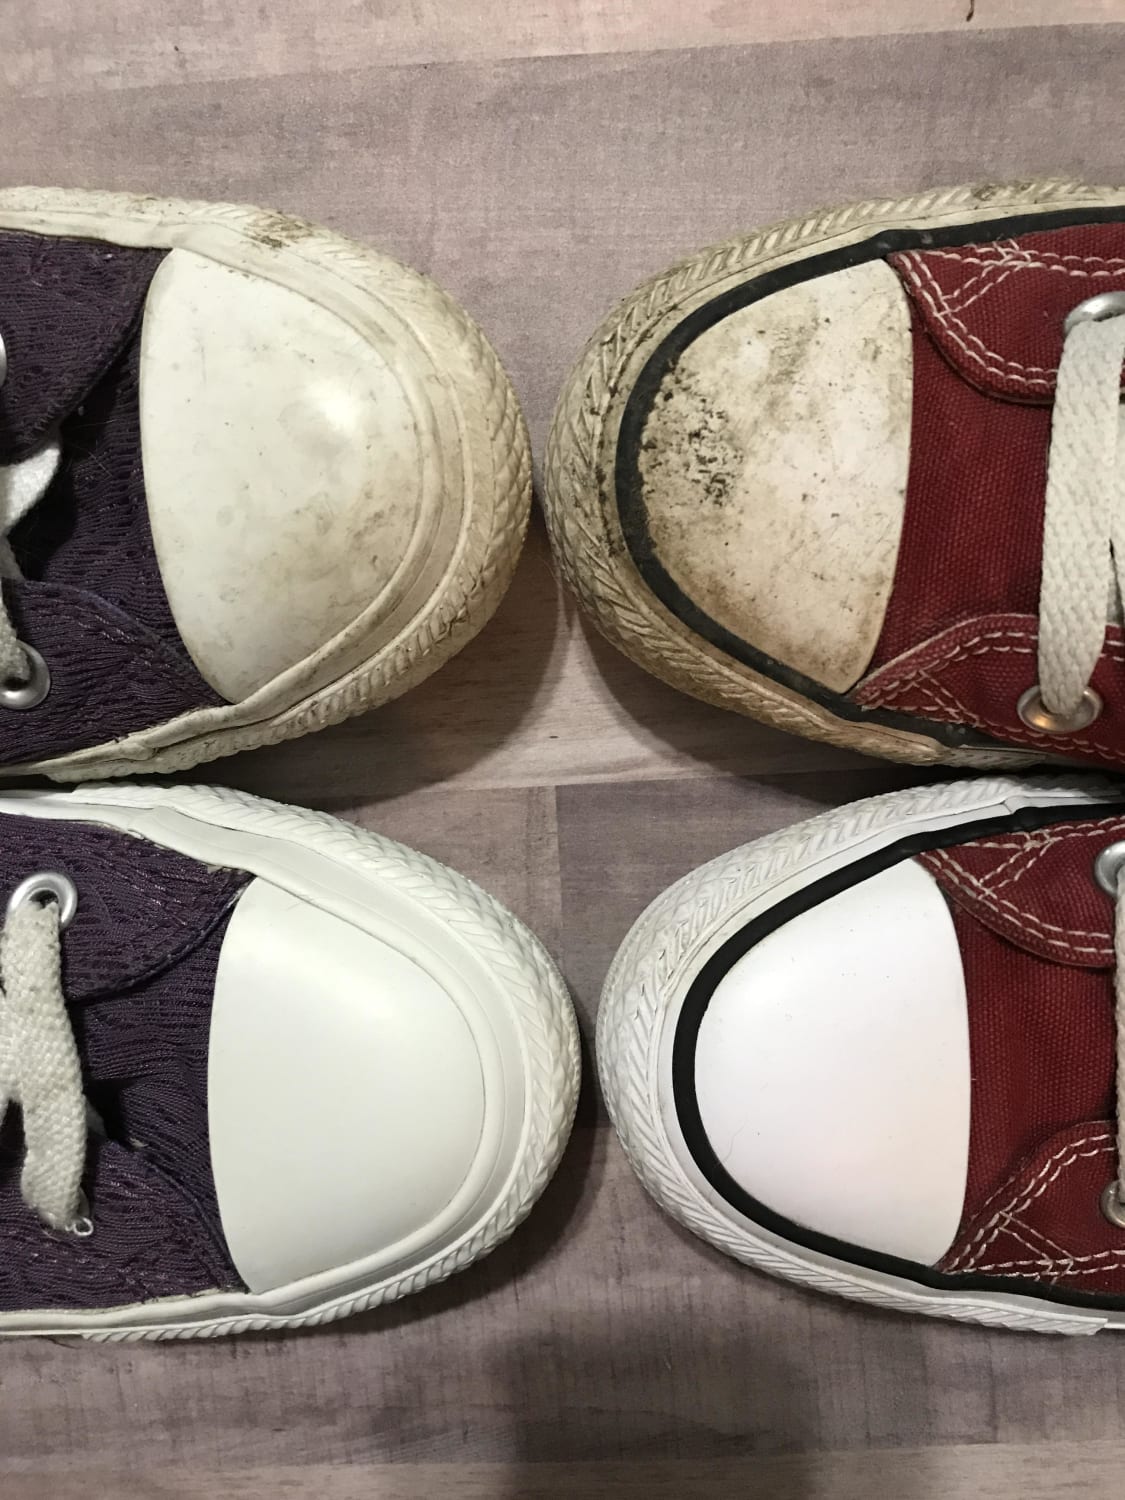 I always find the before and after of cleaning my shoes nice